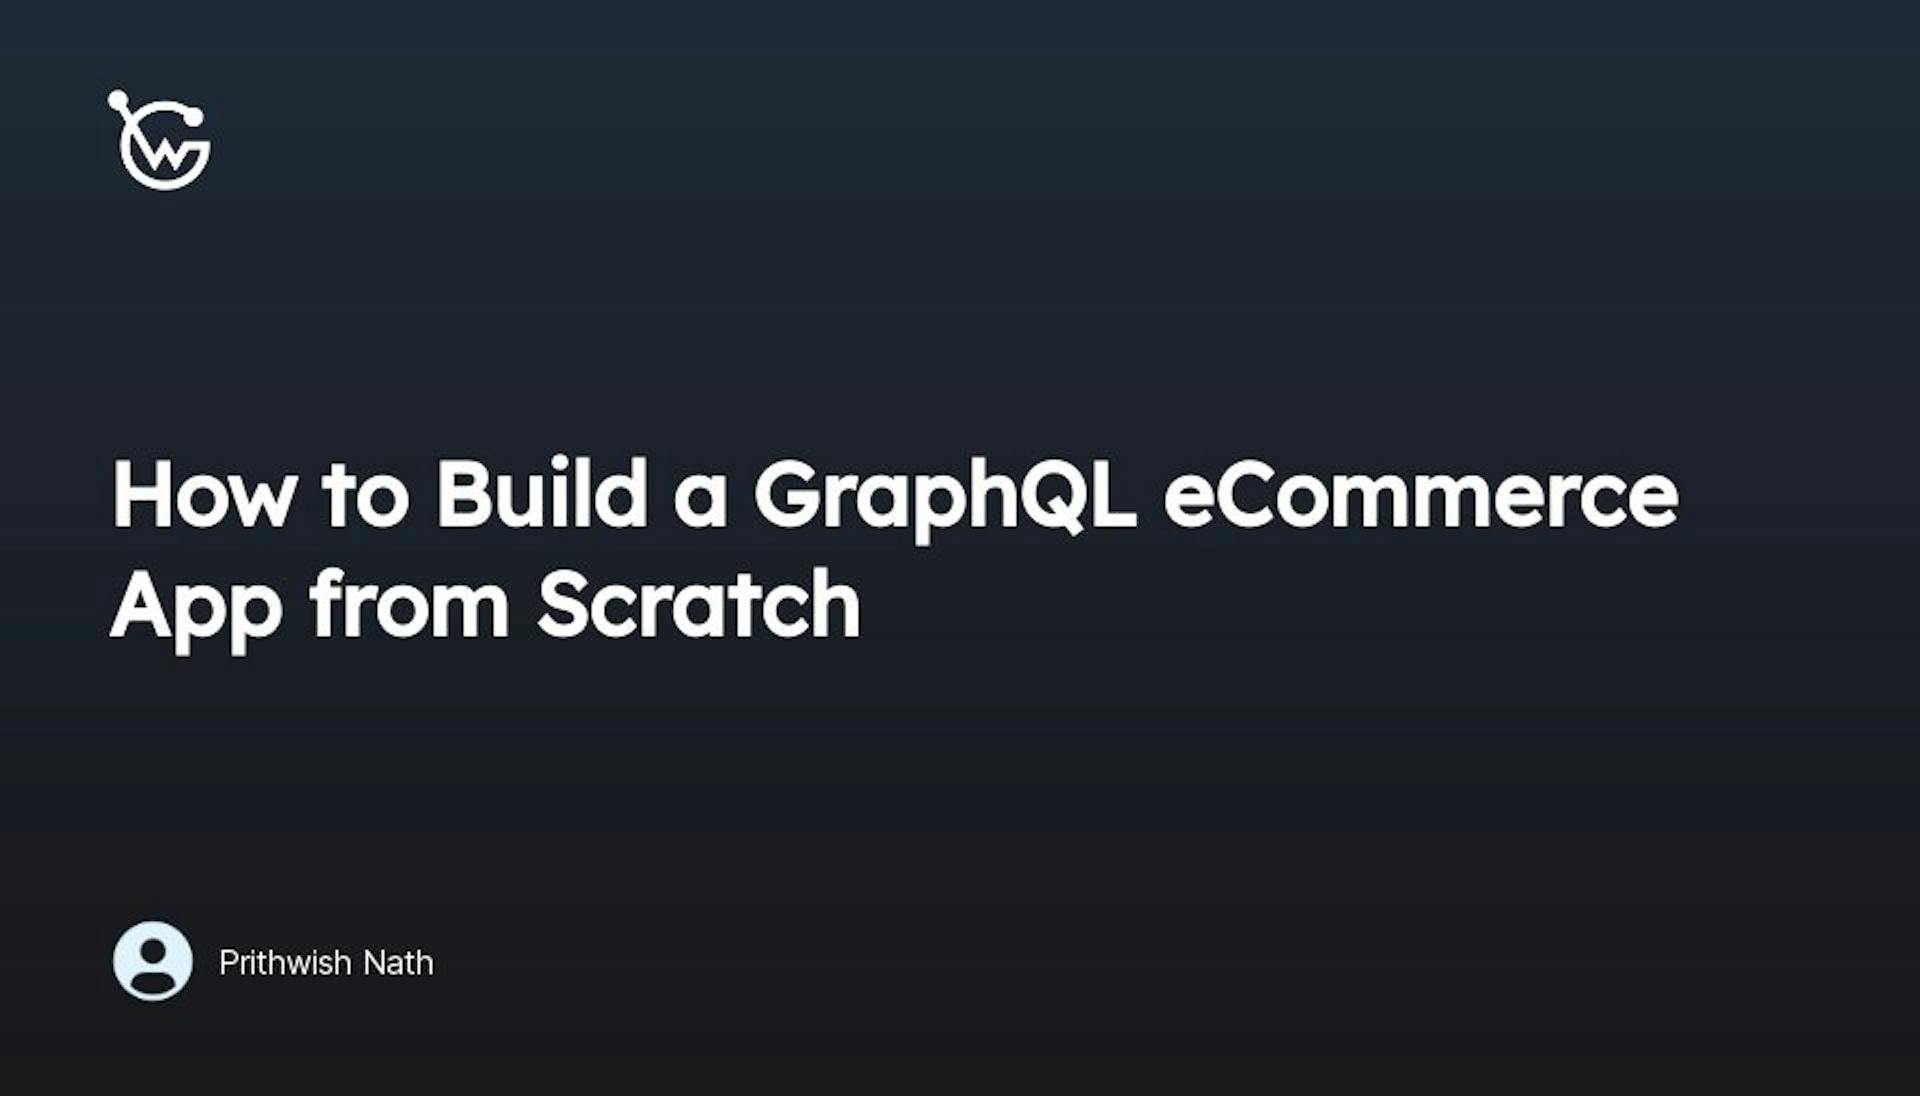 featured image - Building a GraphQL eCommerce App from Scratch